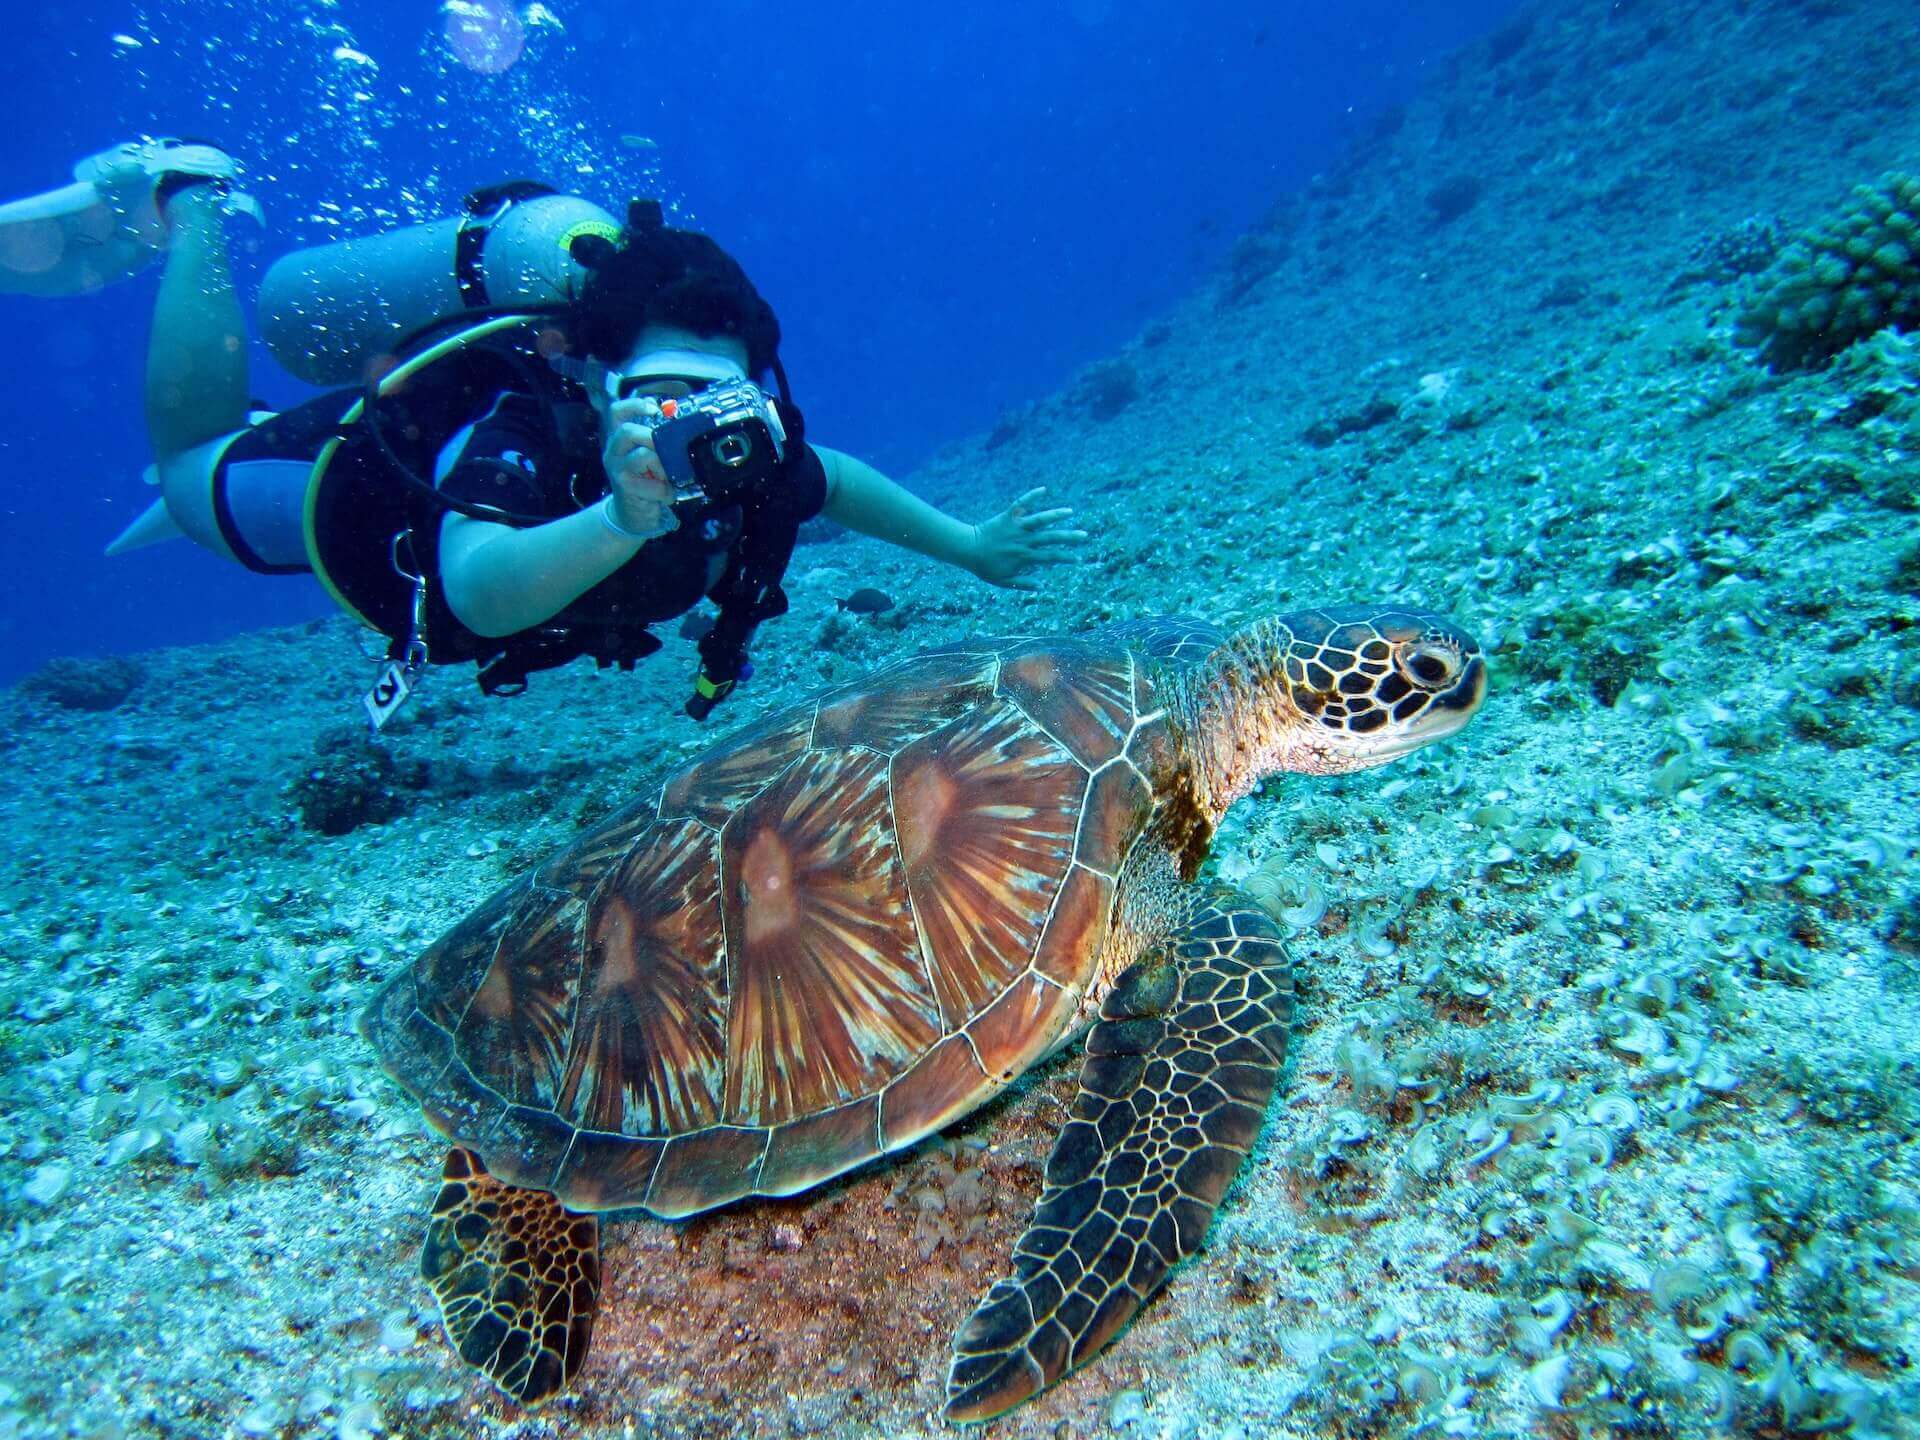 Scubadiver taking a photo of a turtle that is swimming